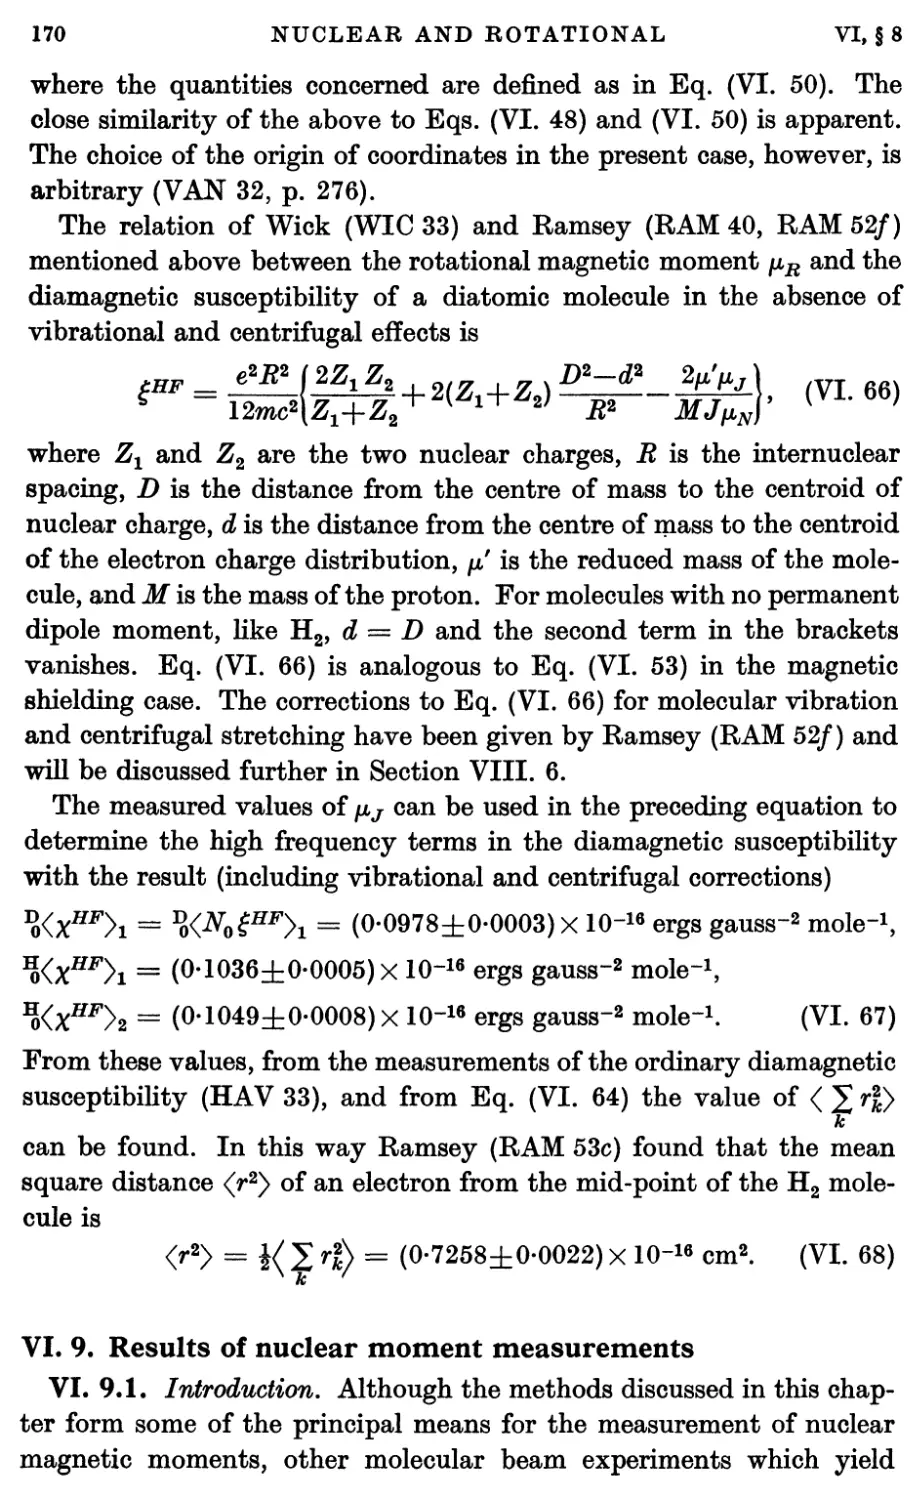 VI.9. Results of Nuclear Moment Measurements